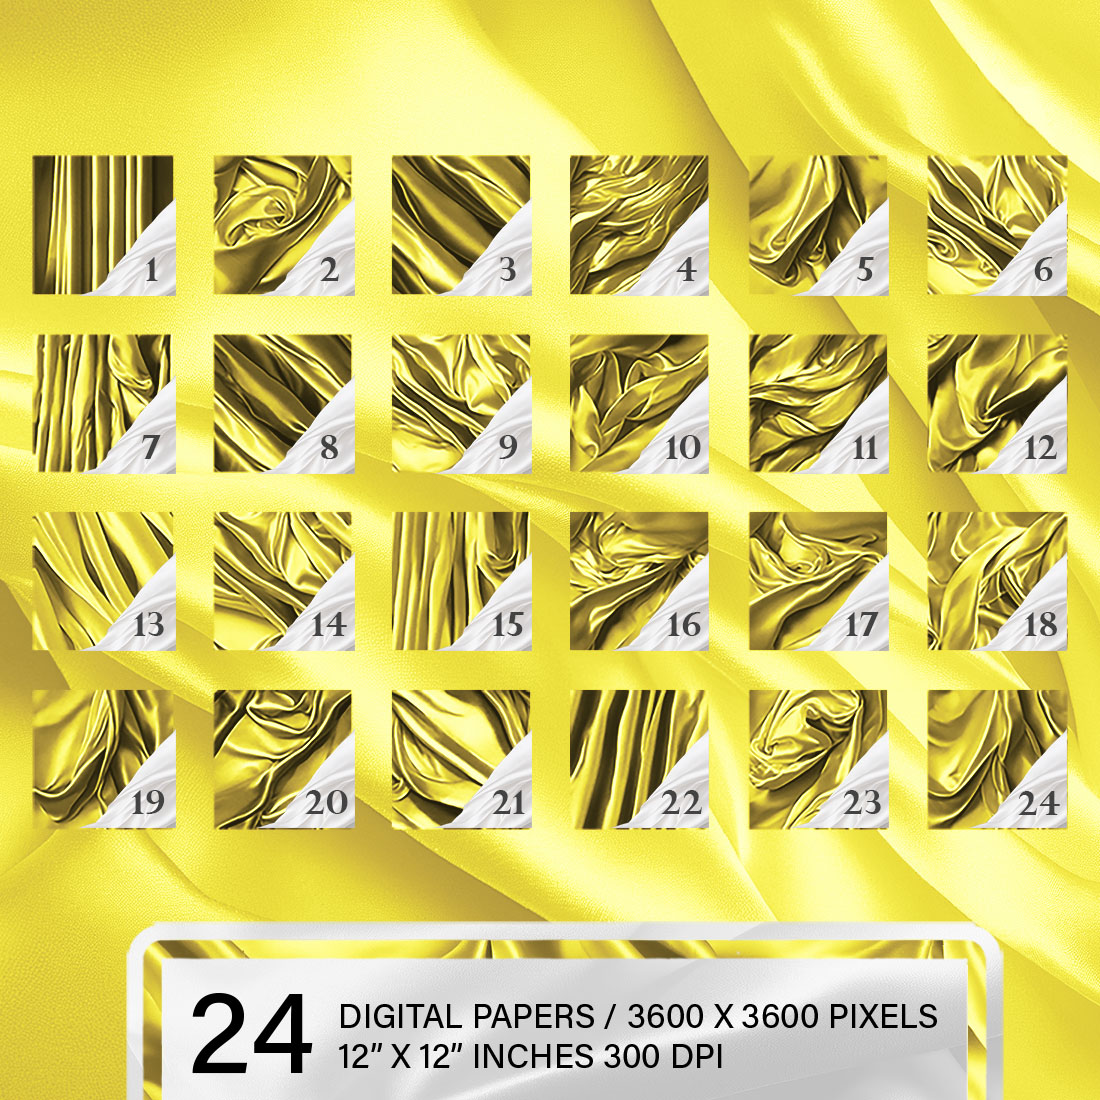 An image pack with gorgeous yellow silk backgrounds.